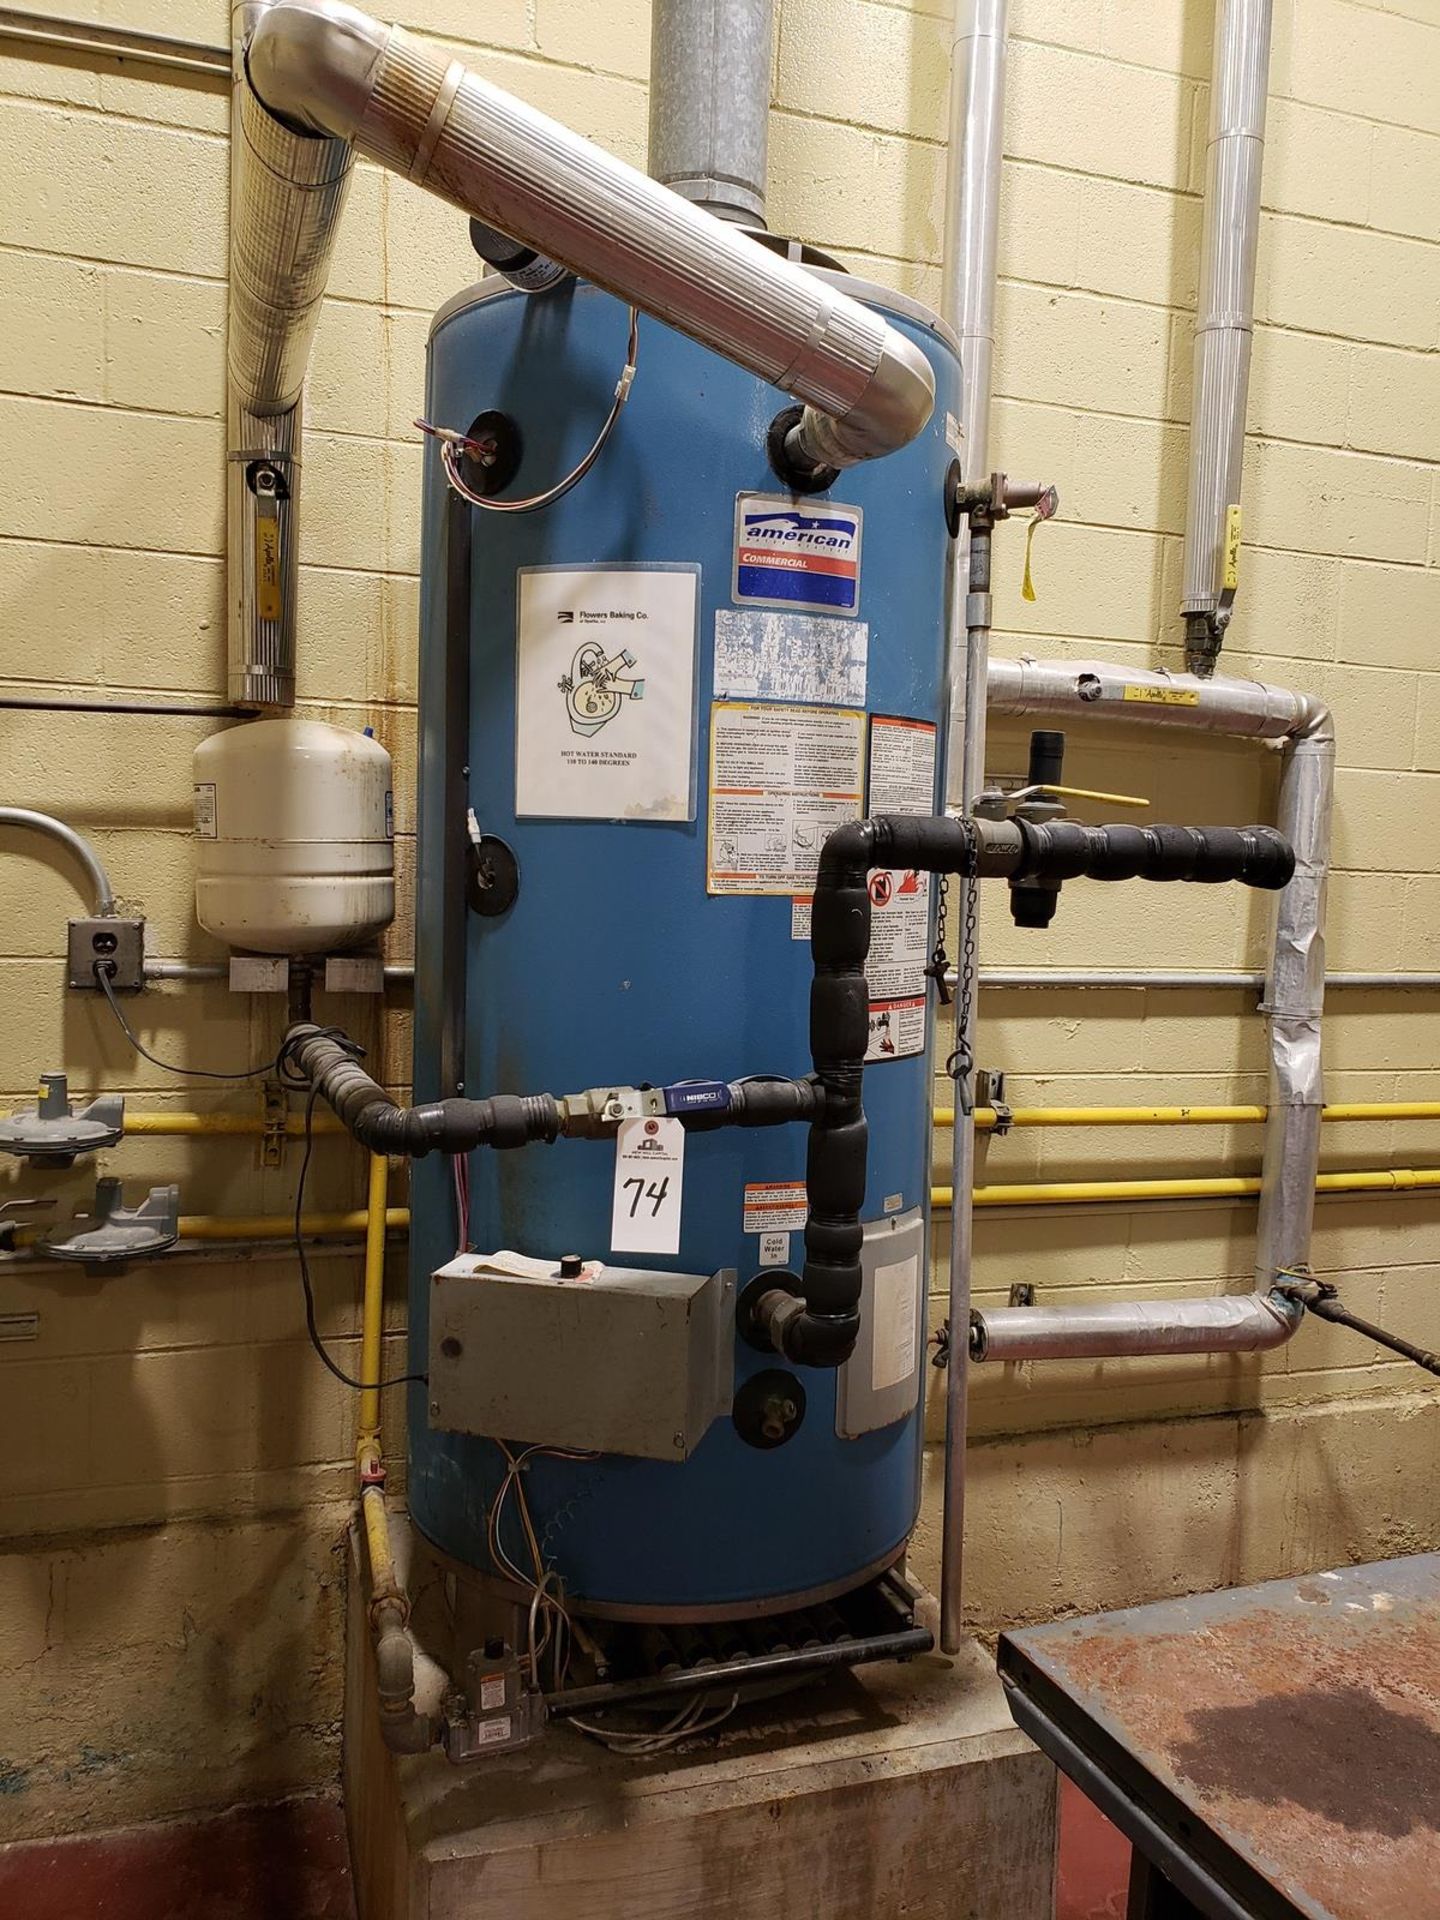 American Commercial Hot Water Heater | Rig Fee $100